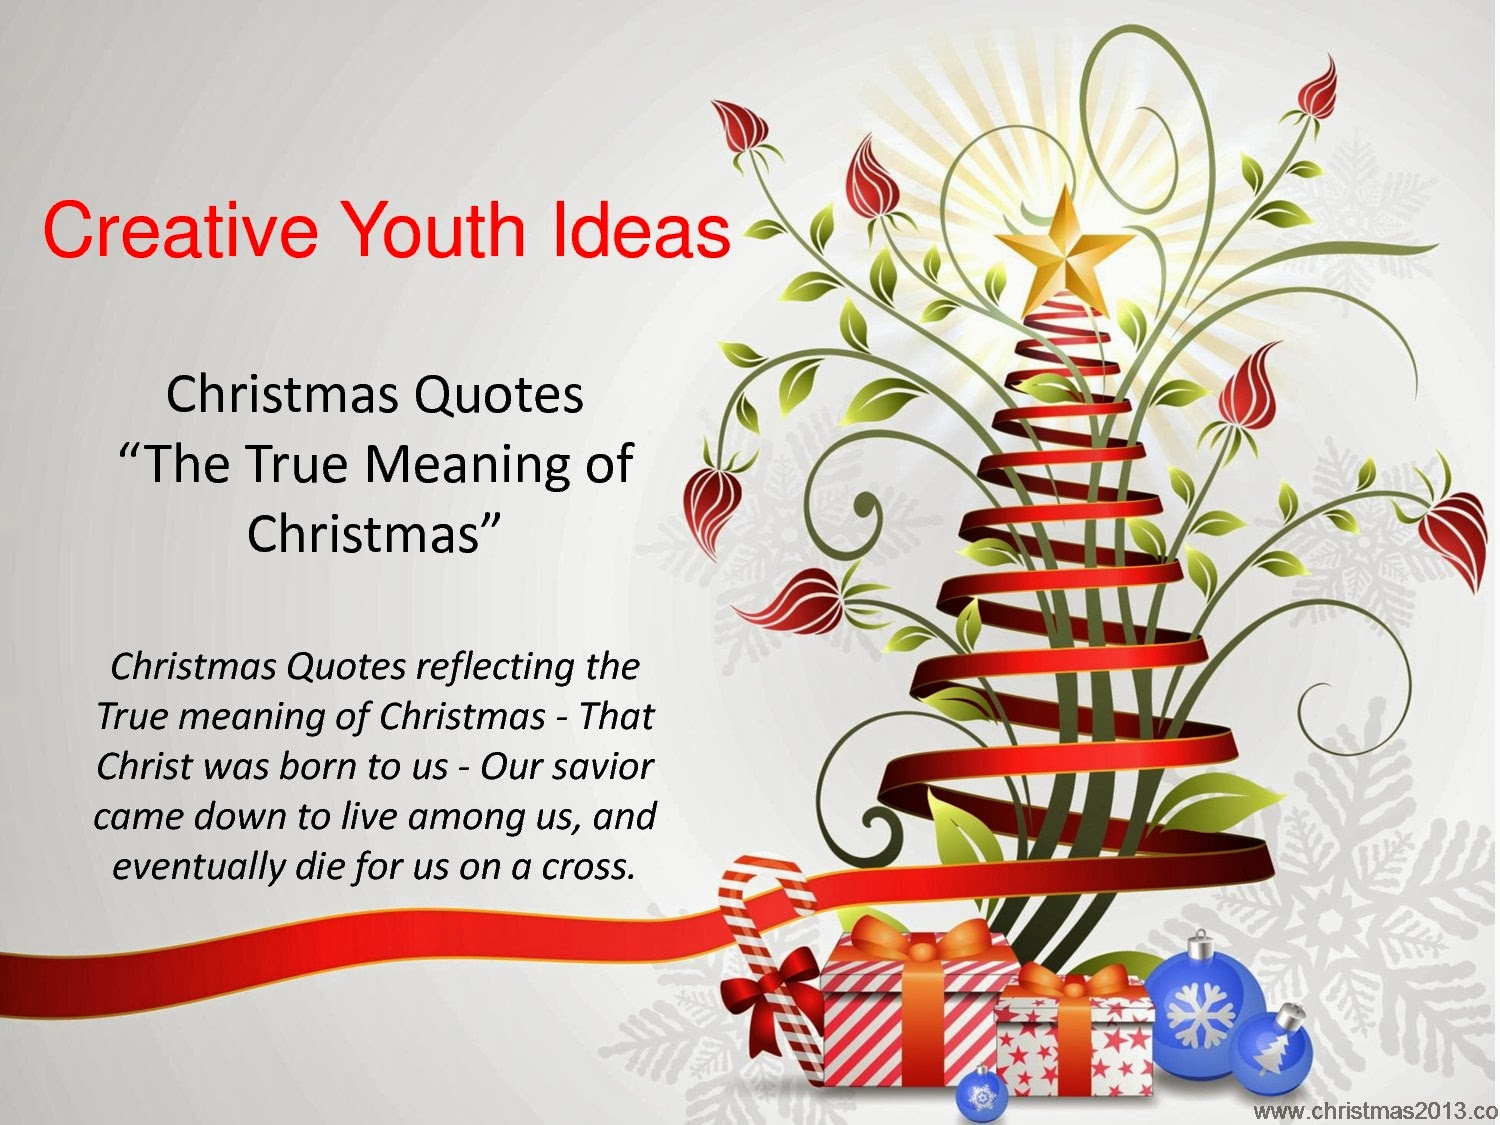 Christmas quote #4